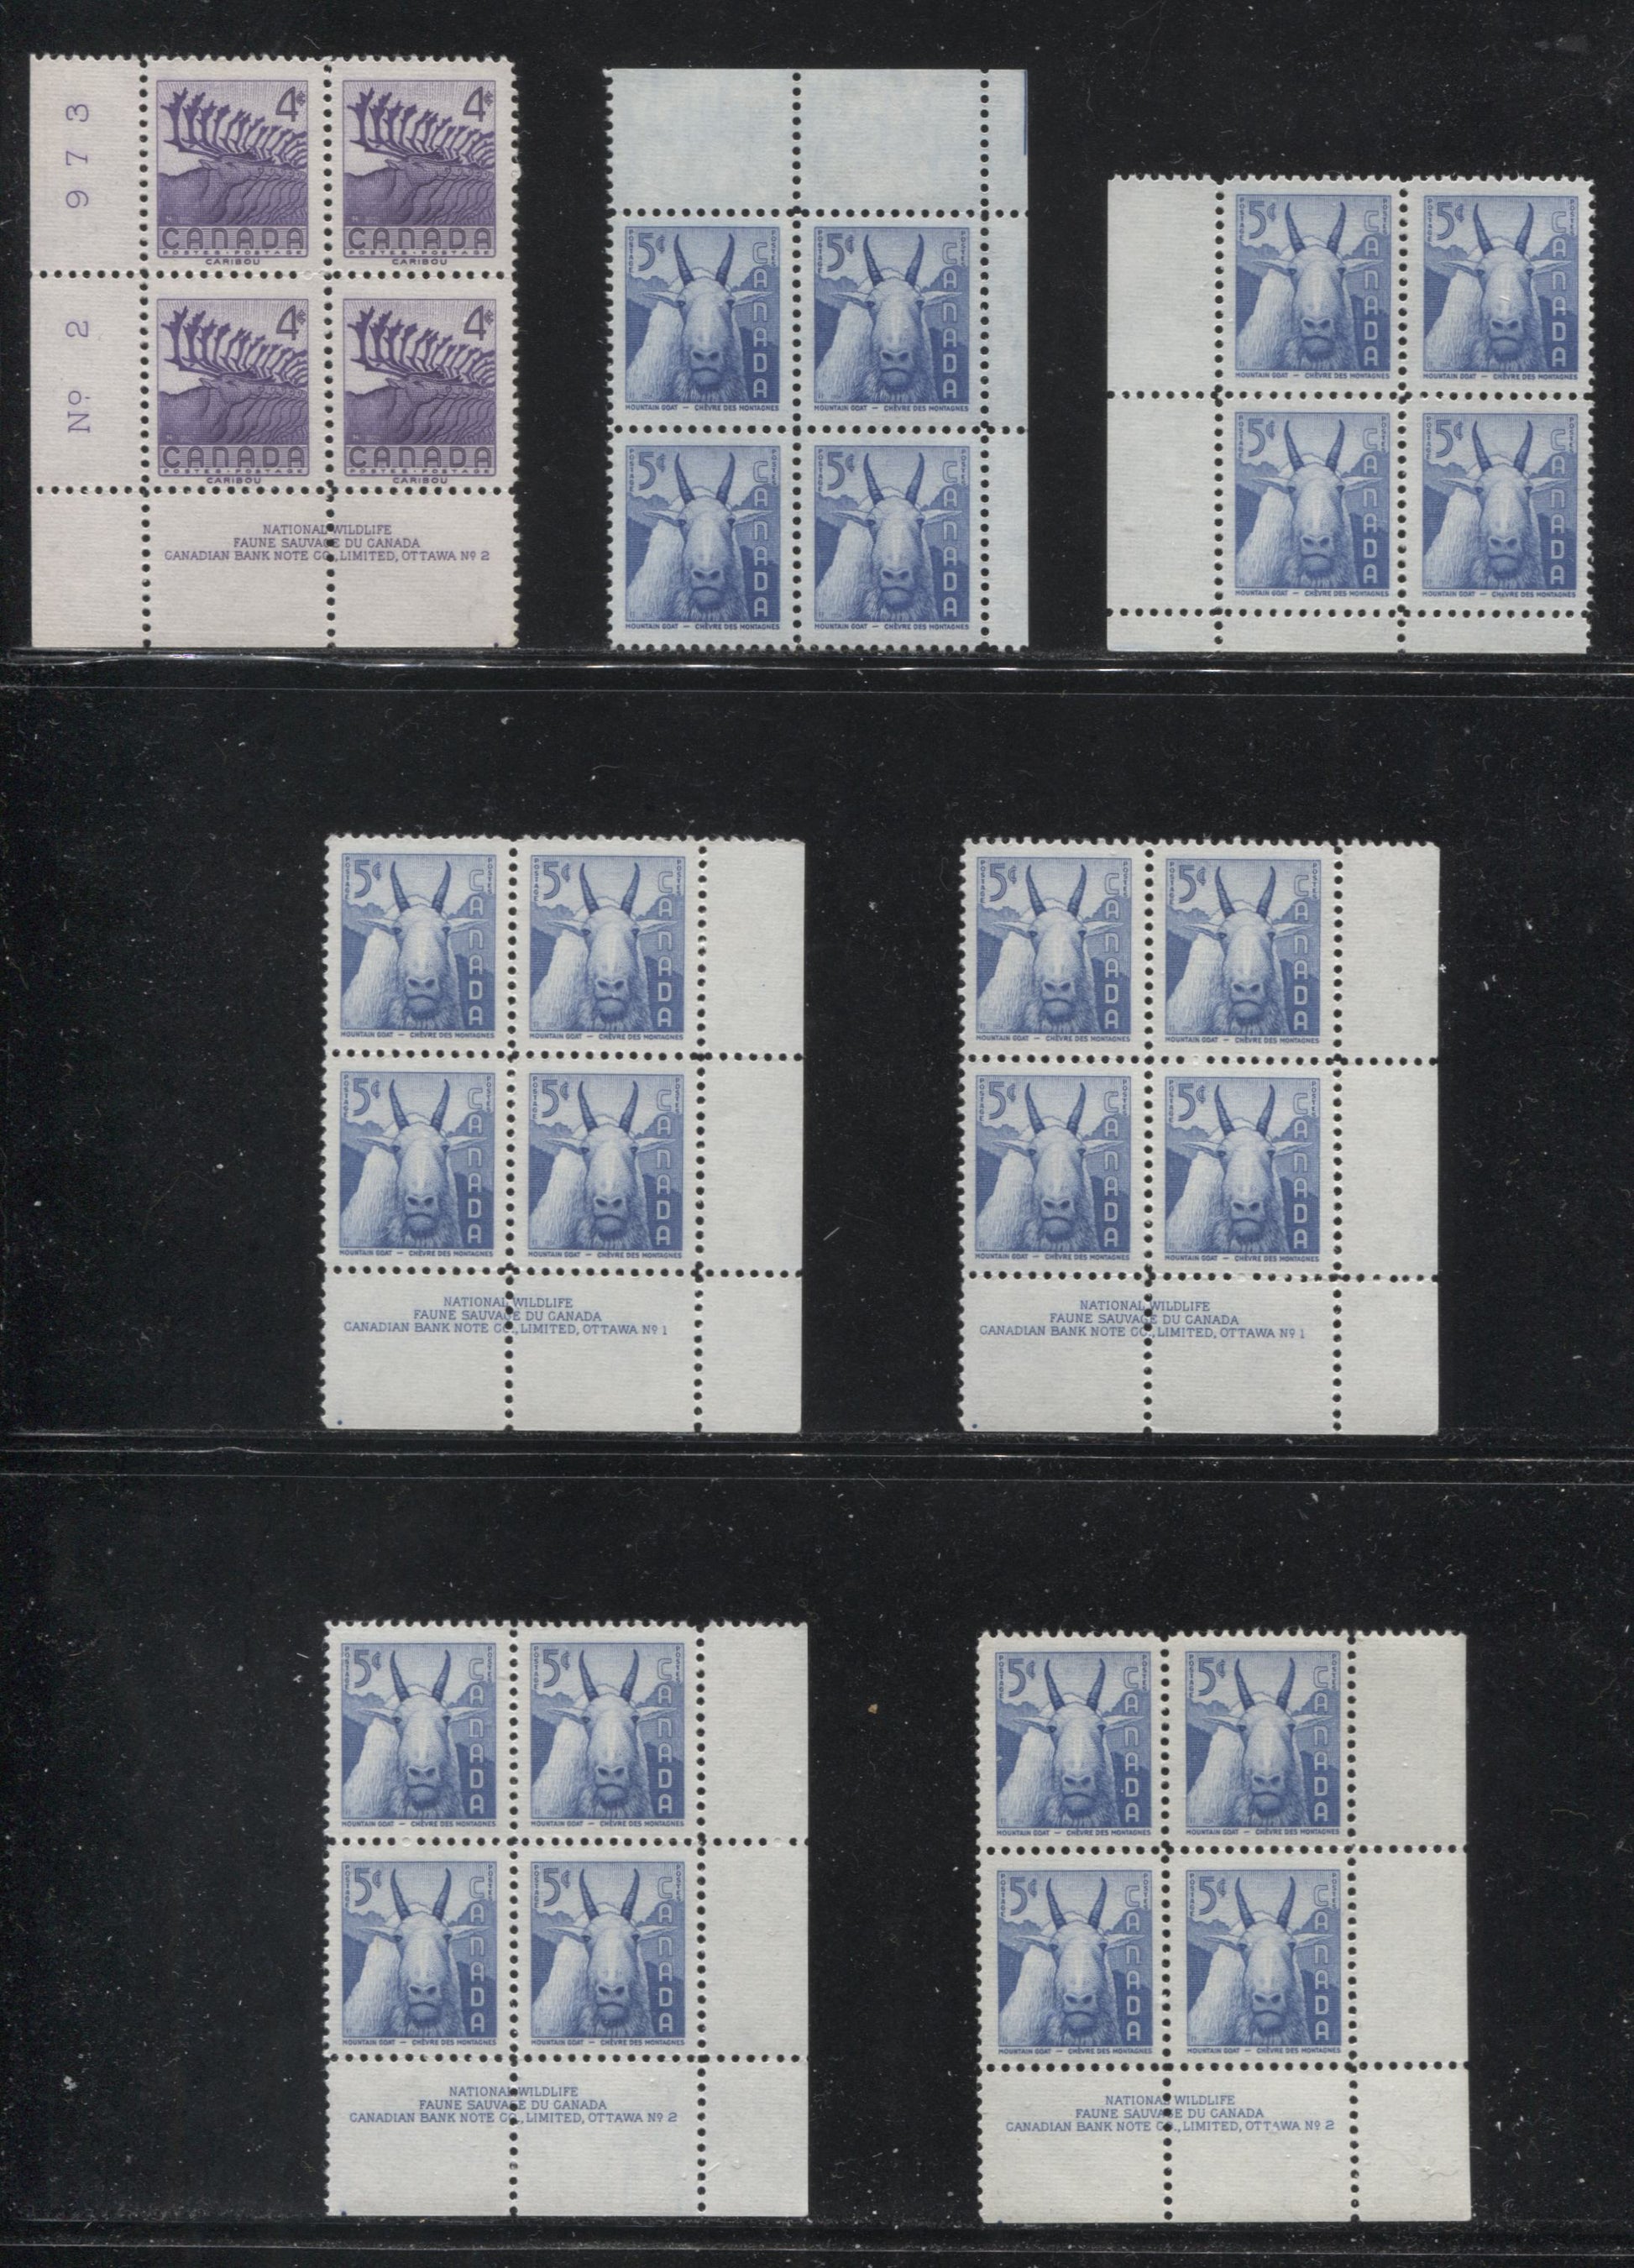 Canada #359-361 4c Violet and 5c Ultramarine, Hockey Players, Caribou & Mountain Goat, 1956 Hockey and National Wildlife Week Issue, A Specialized Group of 13 Blocks From Plates 1 and 2, Showing Different Perforations, Papers and Shades, VFNH Brixton Chrome 